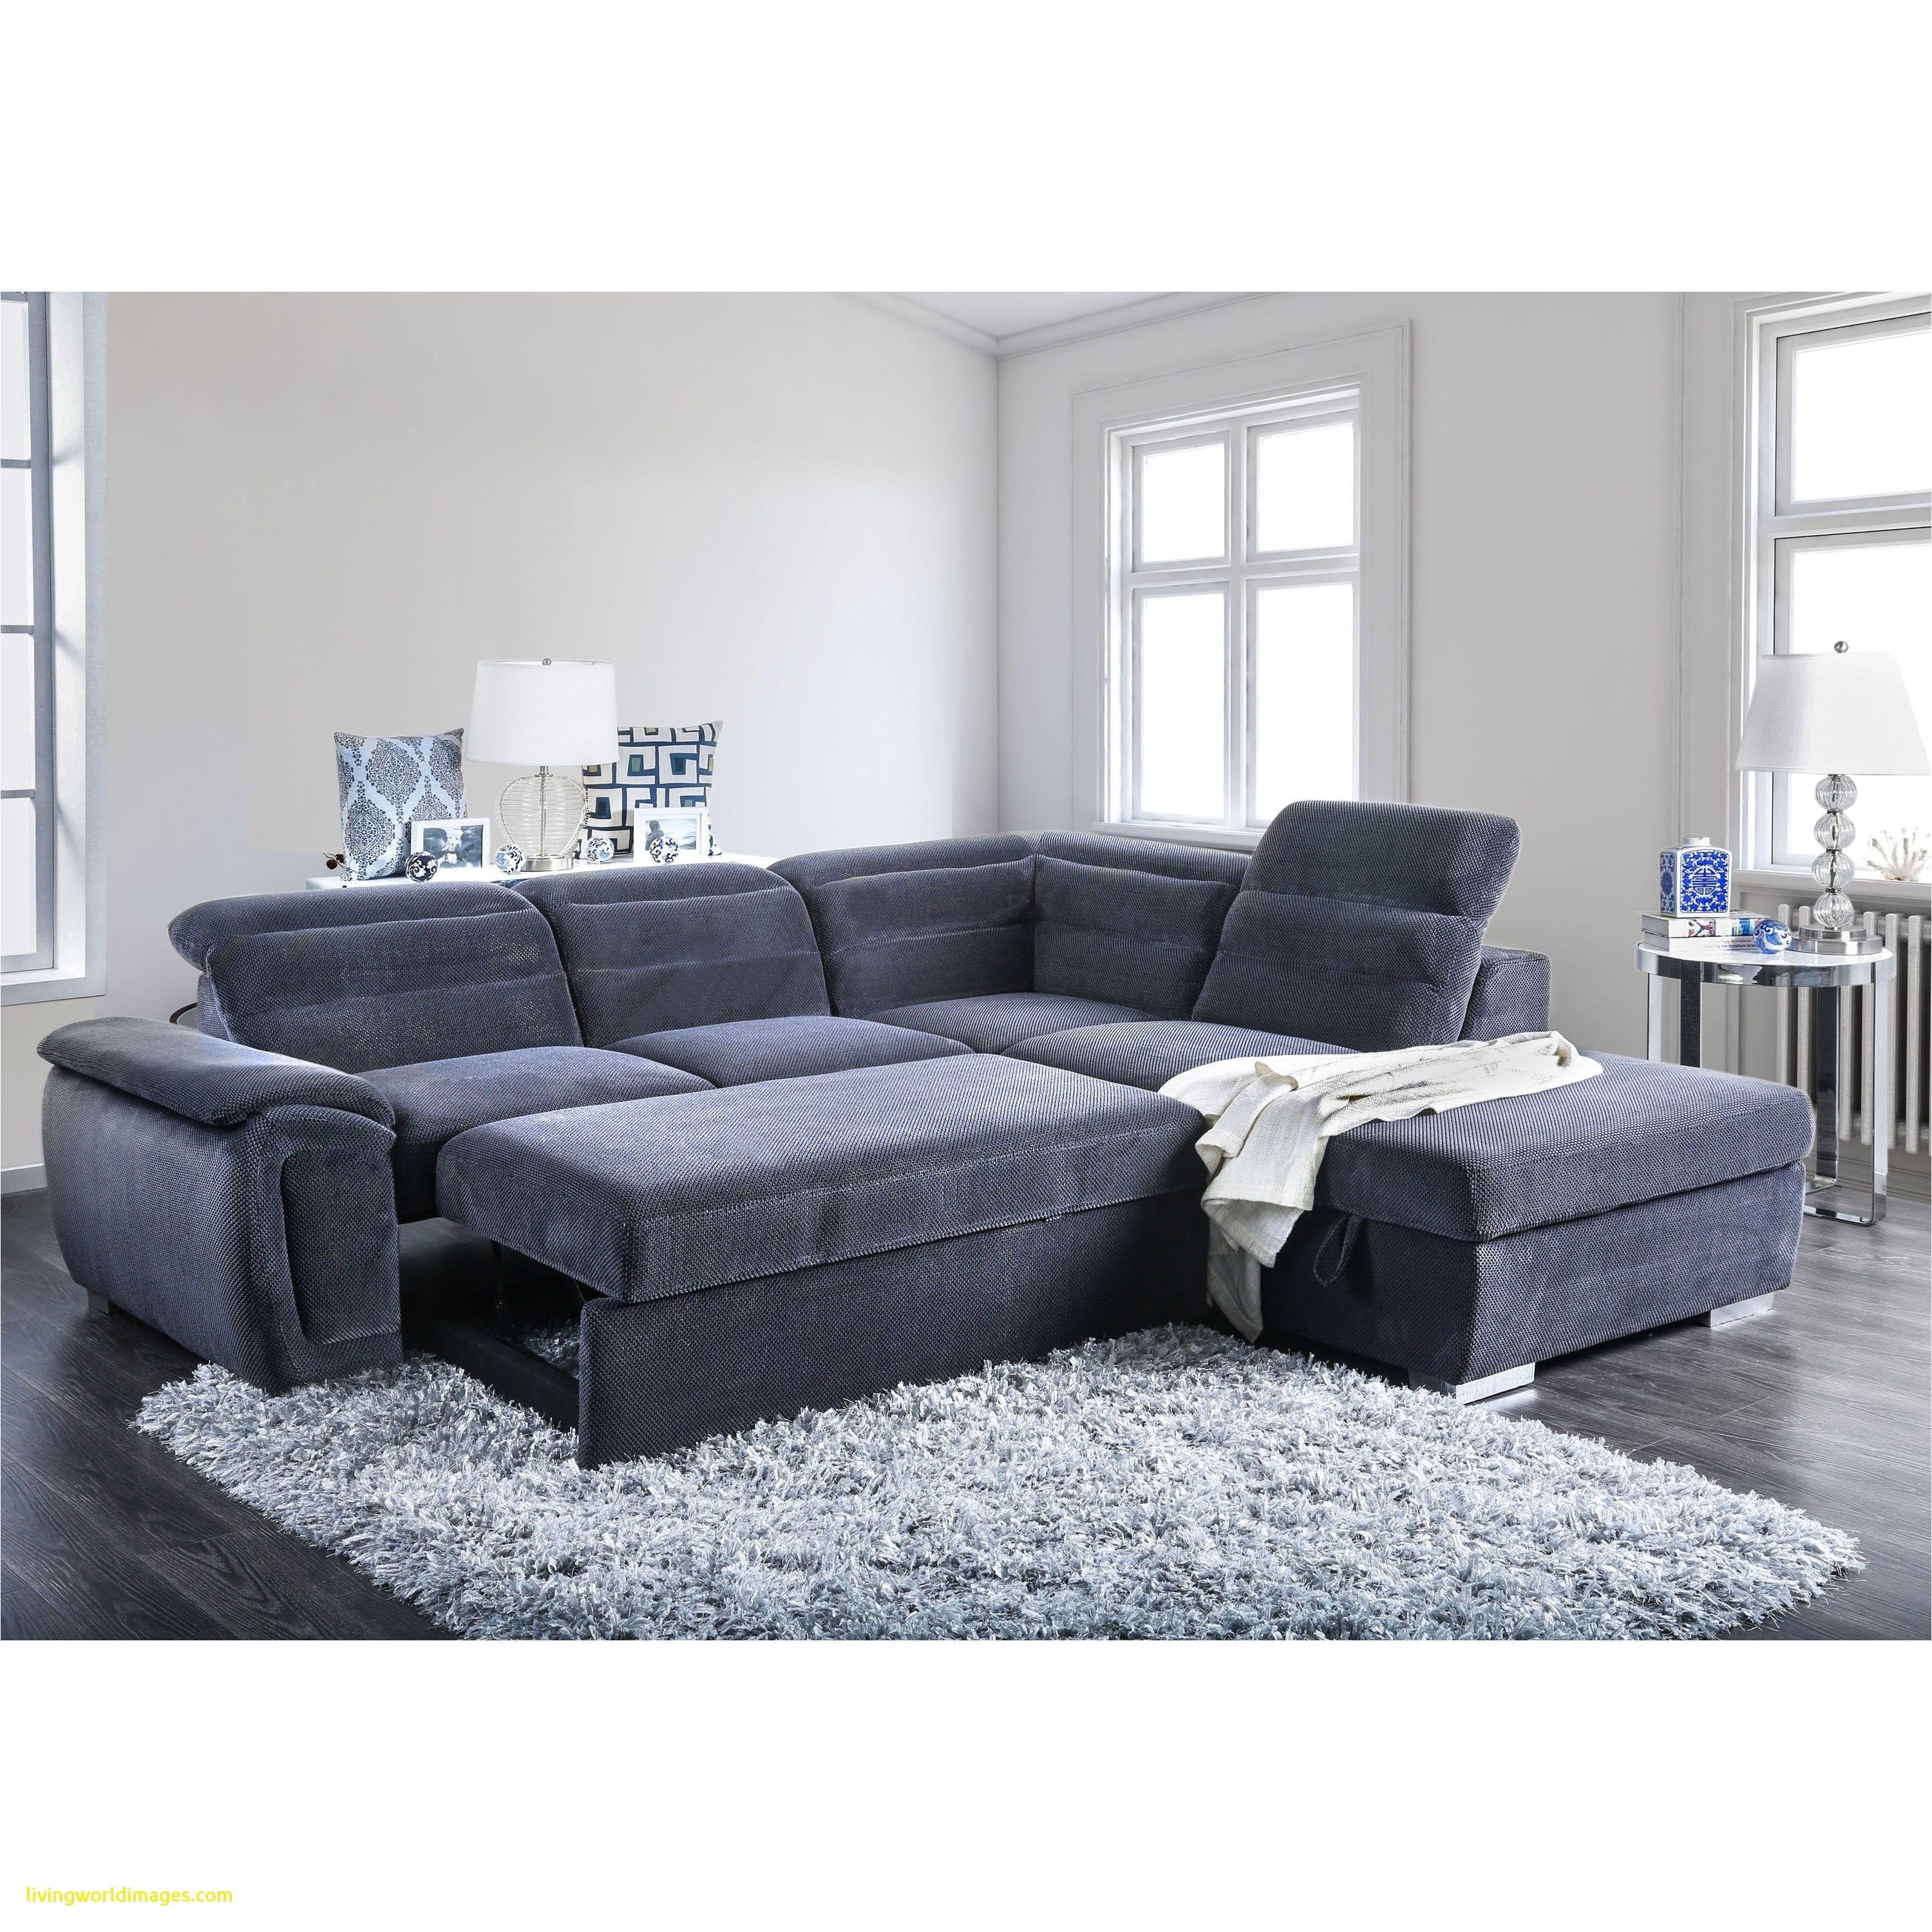 contemporary living room chairs best furniture pull out couch elegant davenport couch 0d tags amazing